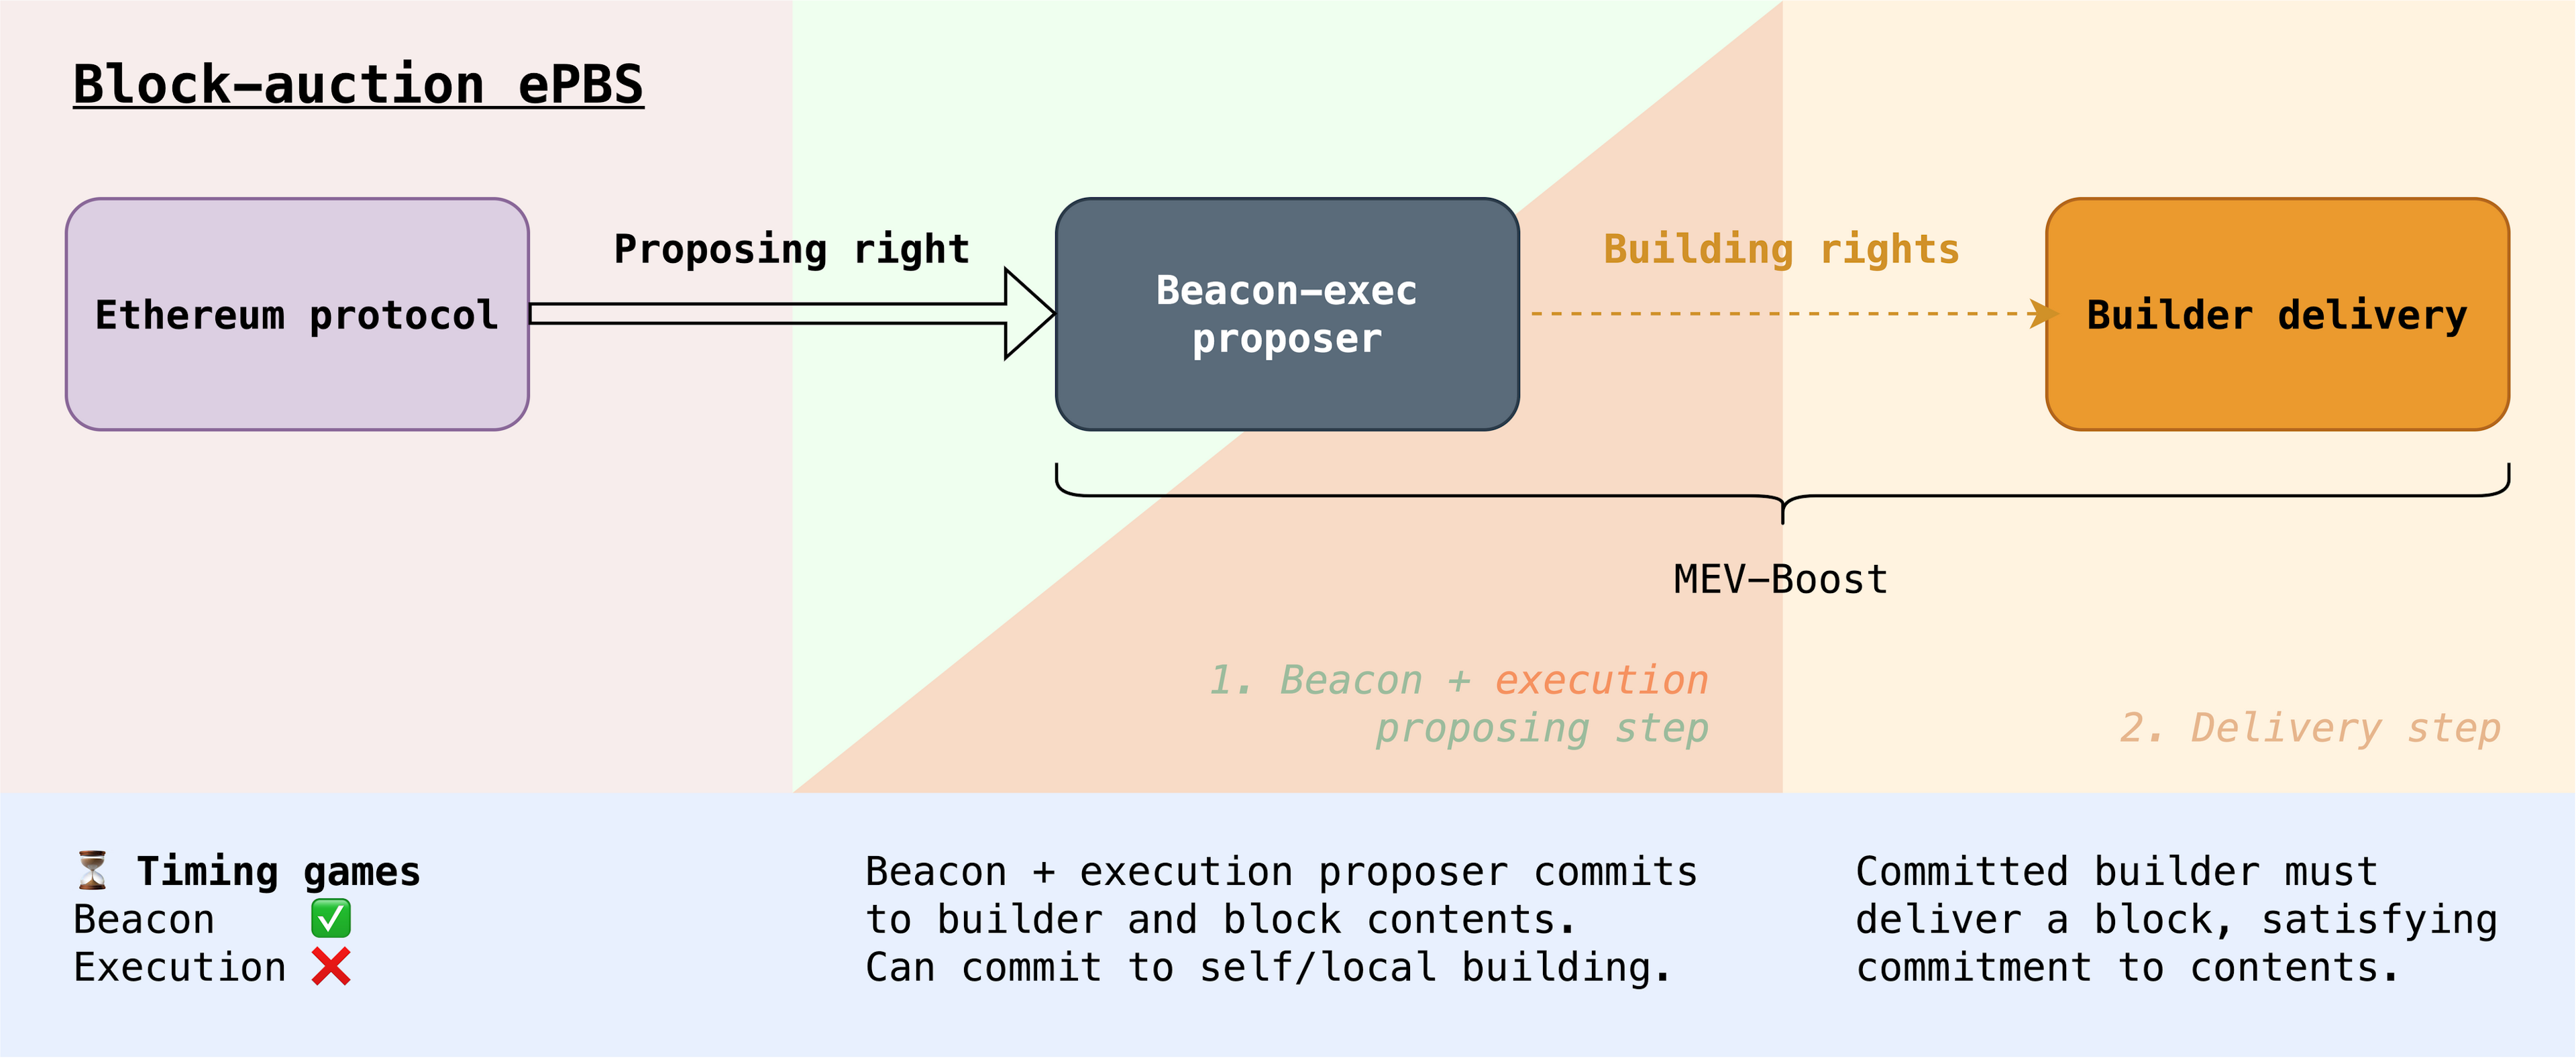 The dashed arrow represents the possibility for the beacon proposer to commit to a separate builder.